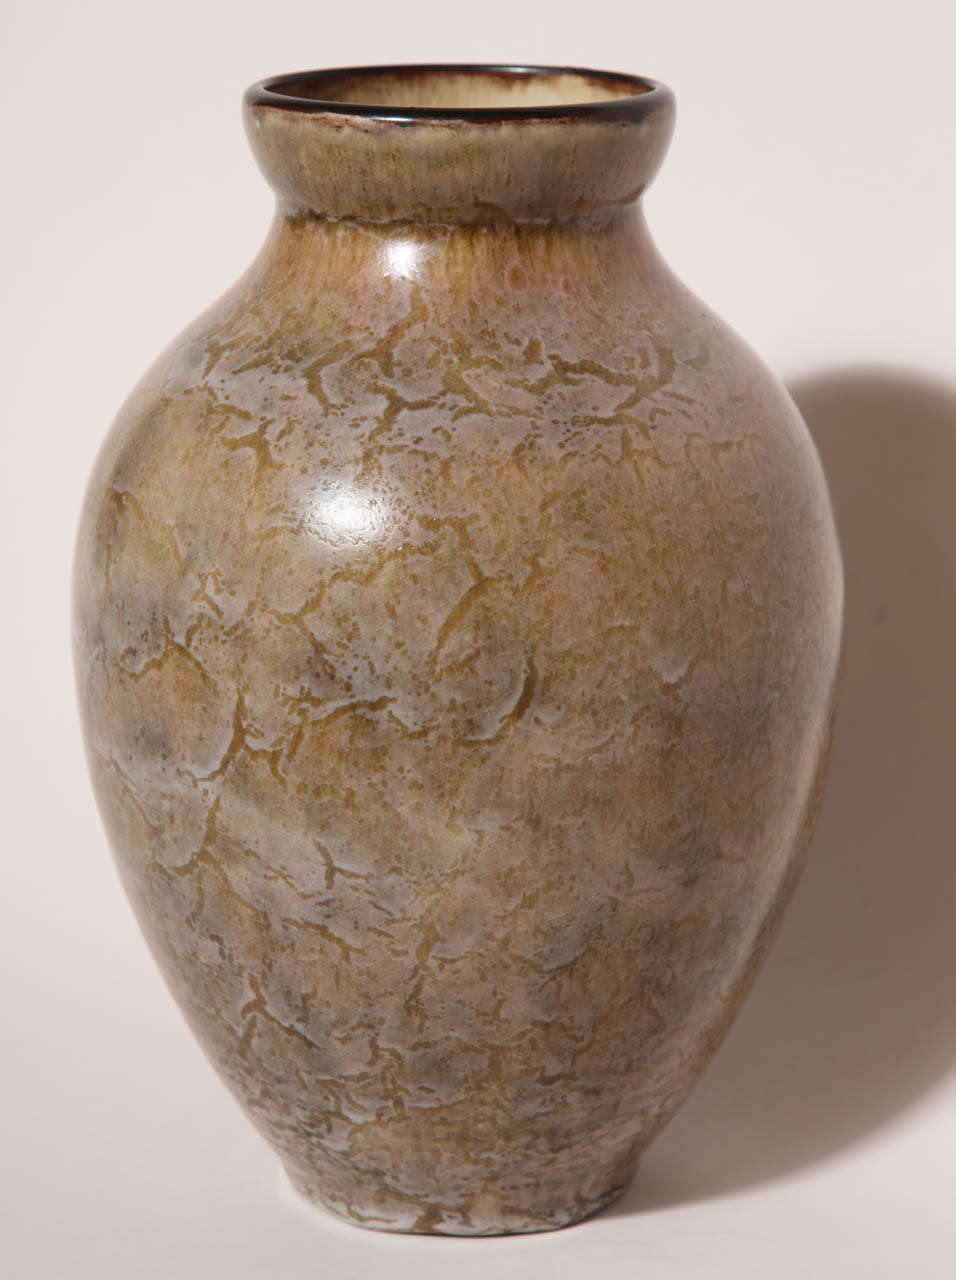 This large stoneware vase with beige rose glaze has circumferential circles around the base and a brown rim.
Signed: 